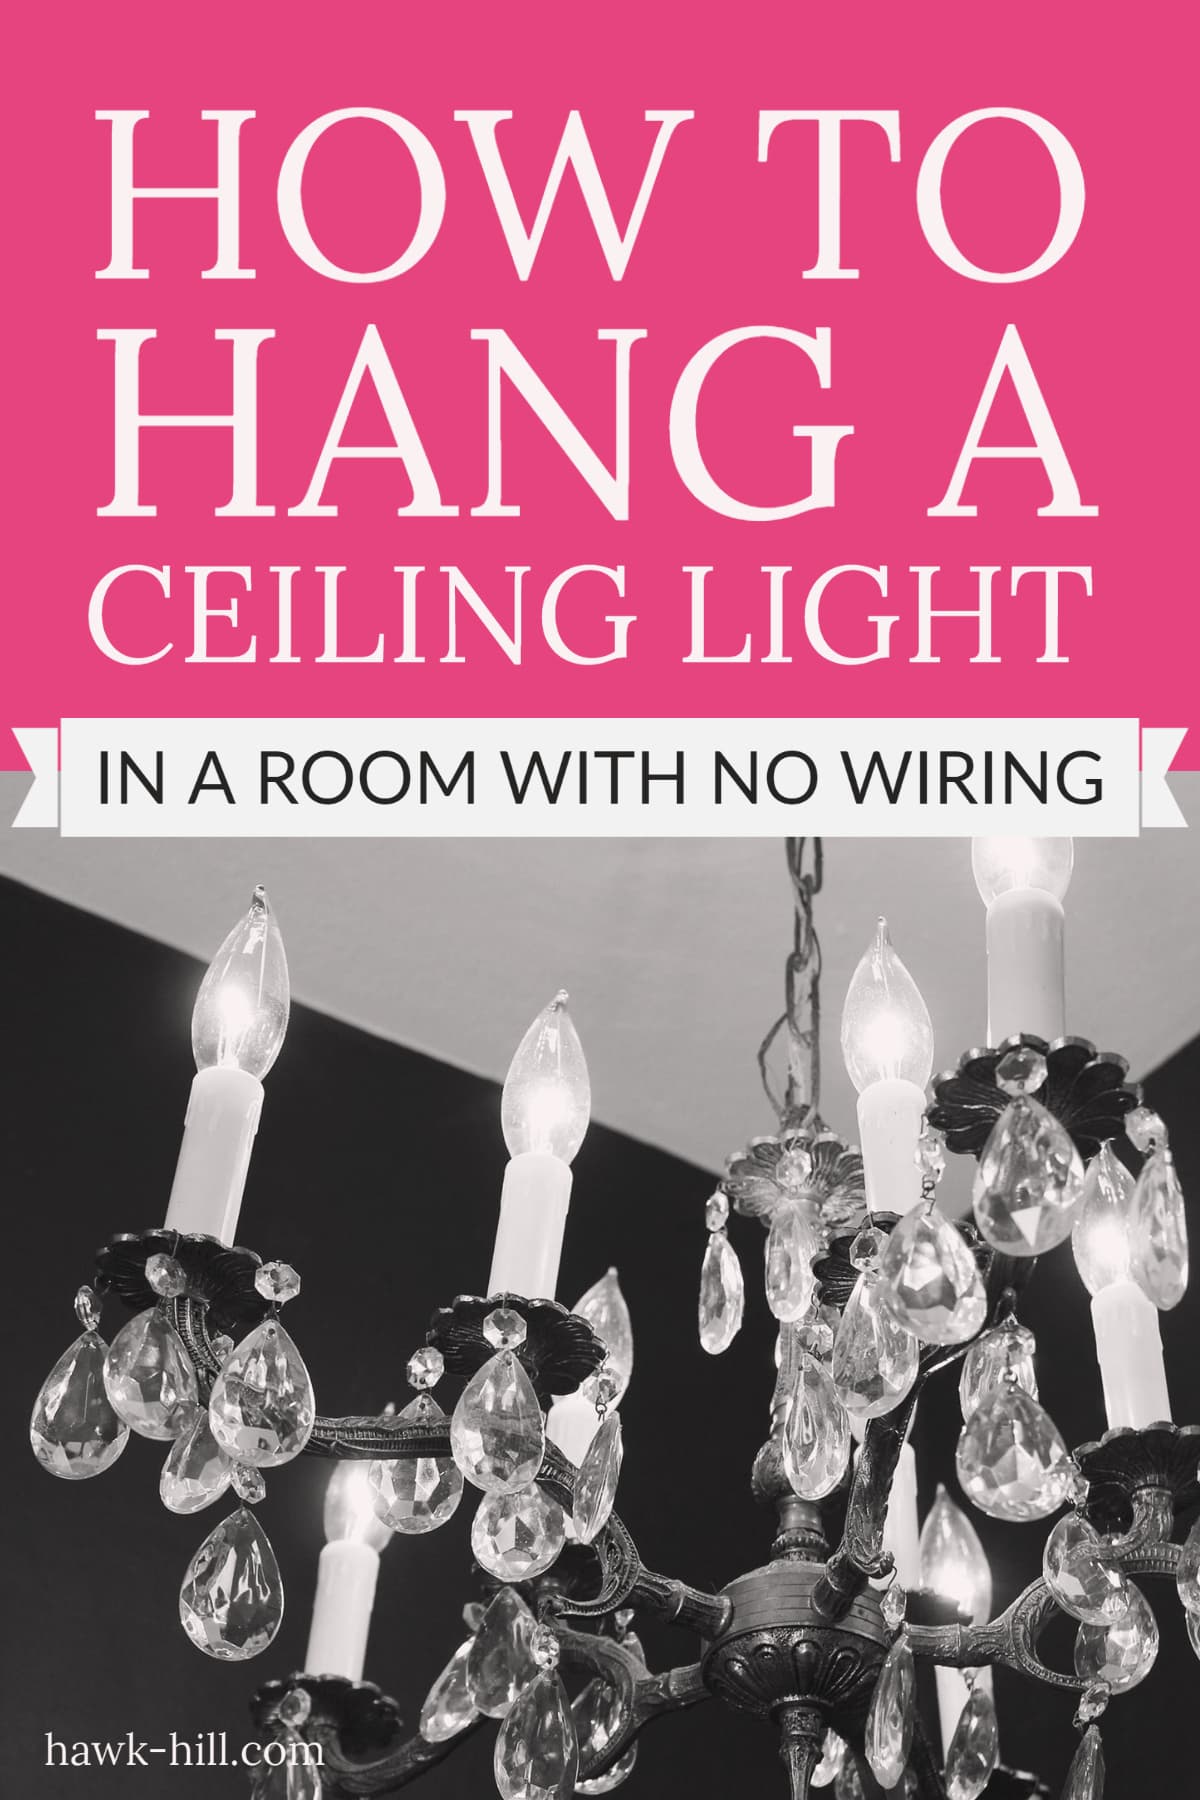 Easy tutorial for handing a chandelier with wall switch in a room without overhead wiring